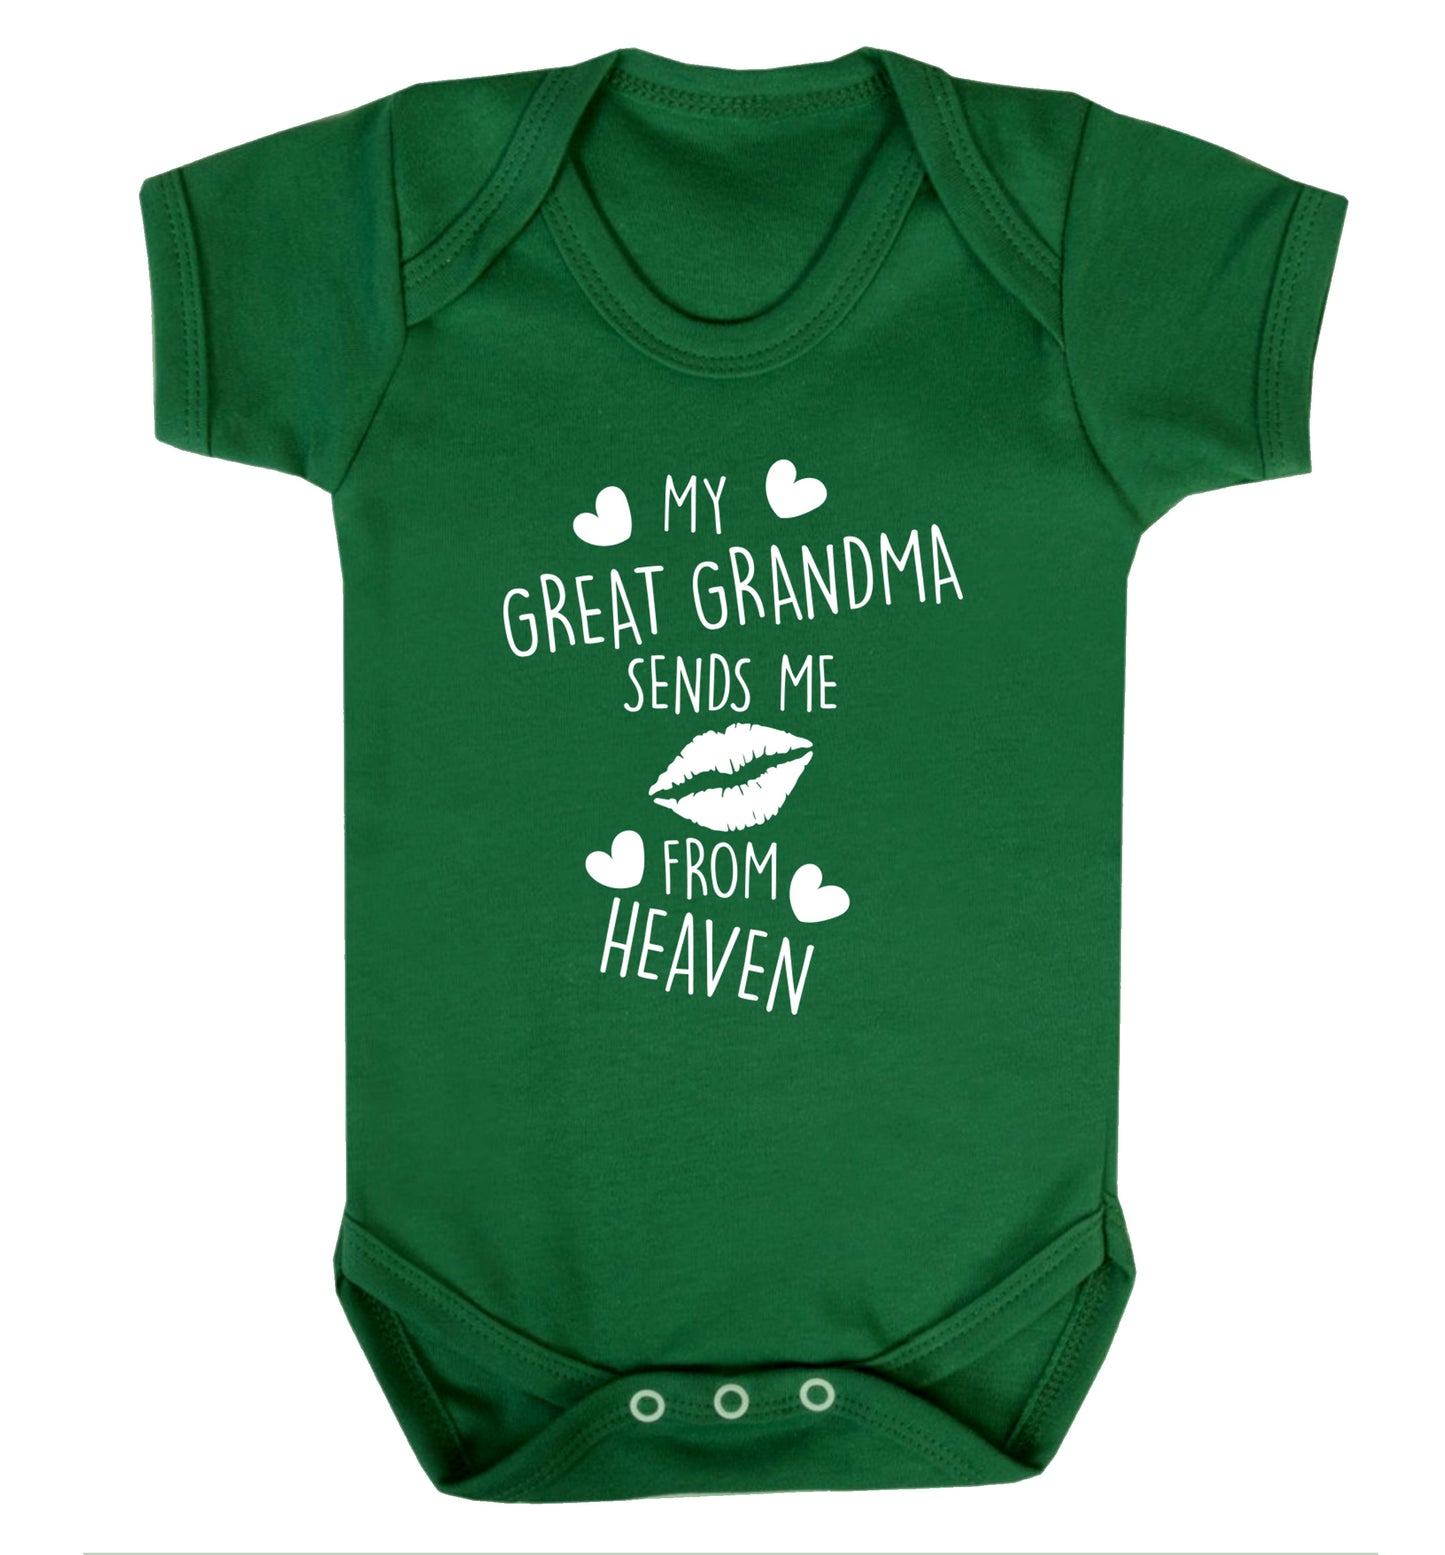 My great grandma sends me kisses from heaven Baby Vest green 18-24 months